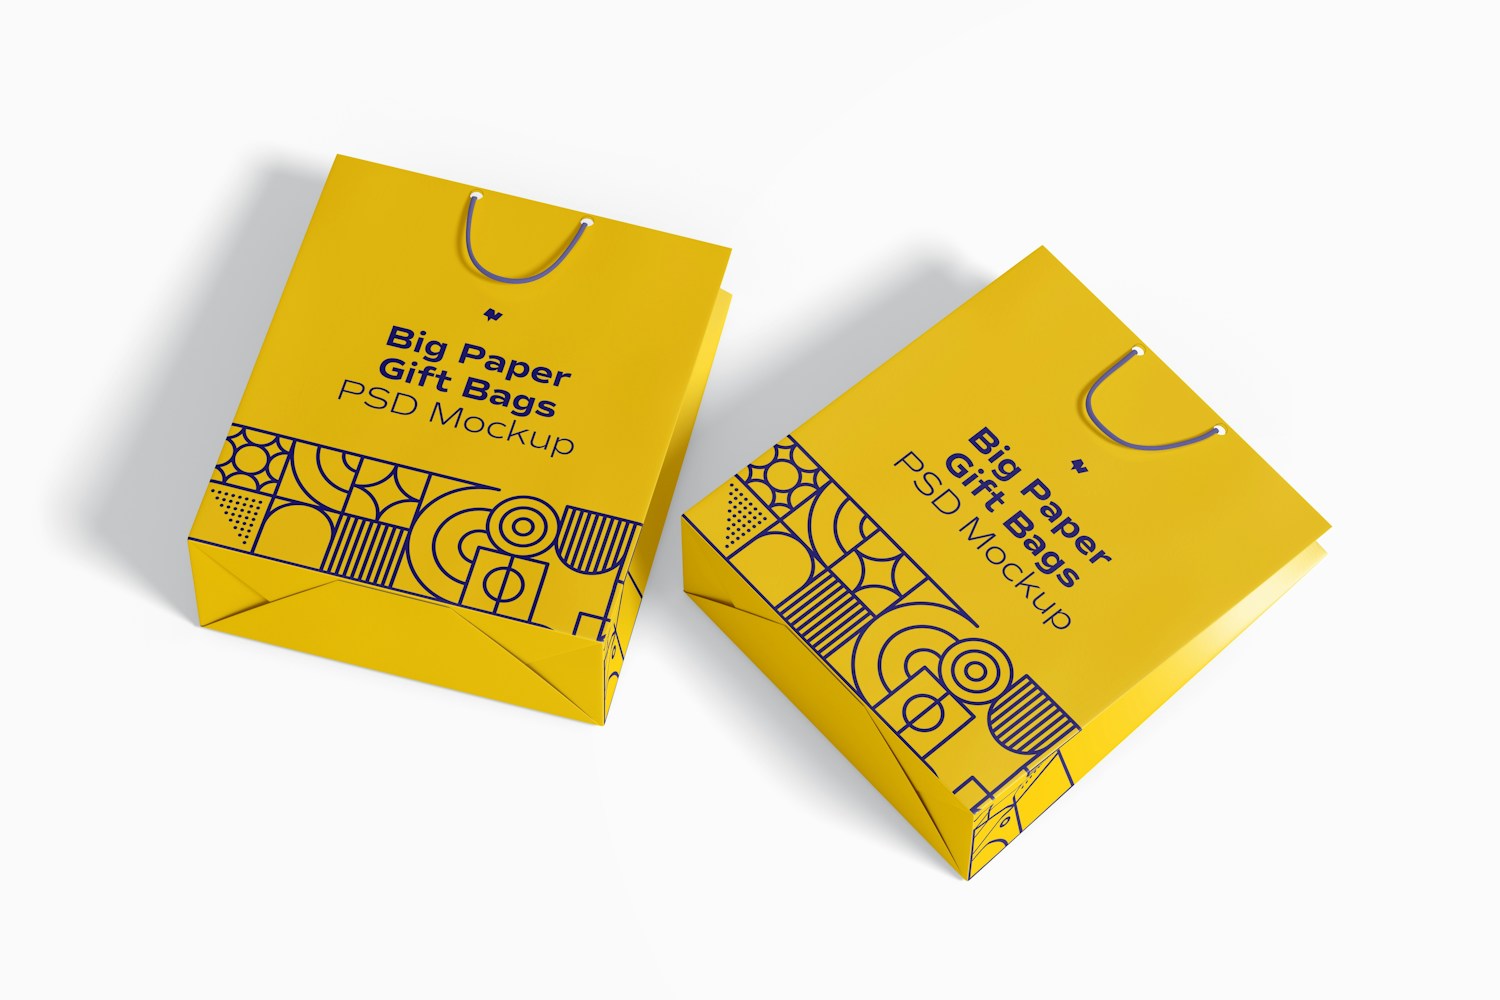 Big Paper Gift Bags With Rope Handle Mockup, Top View